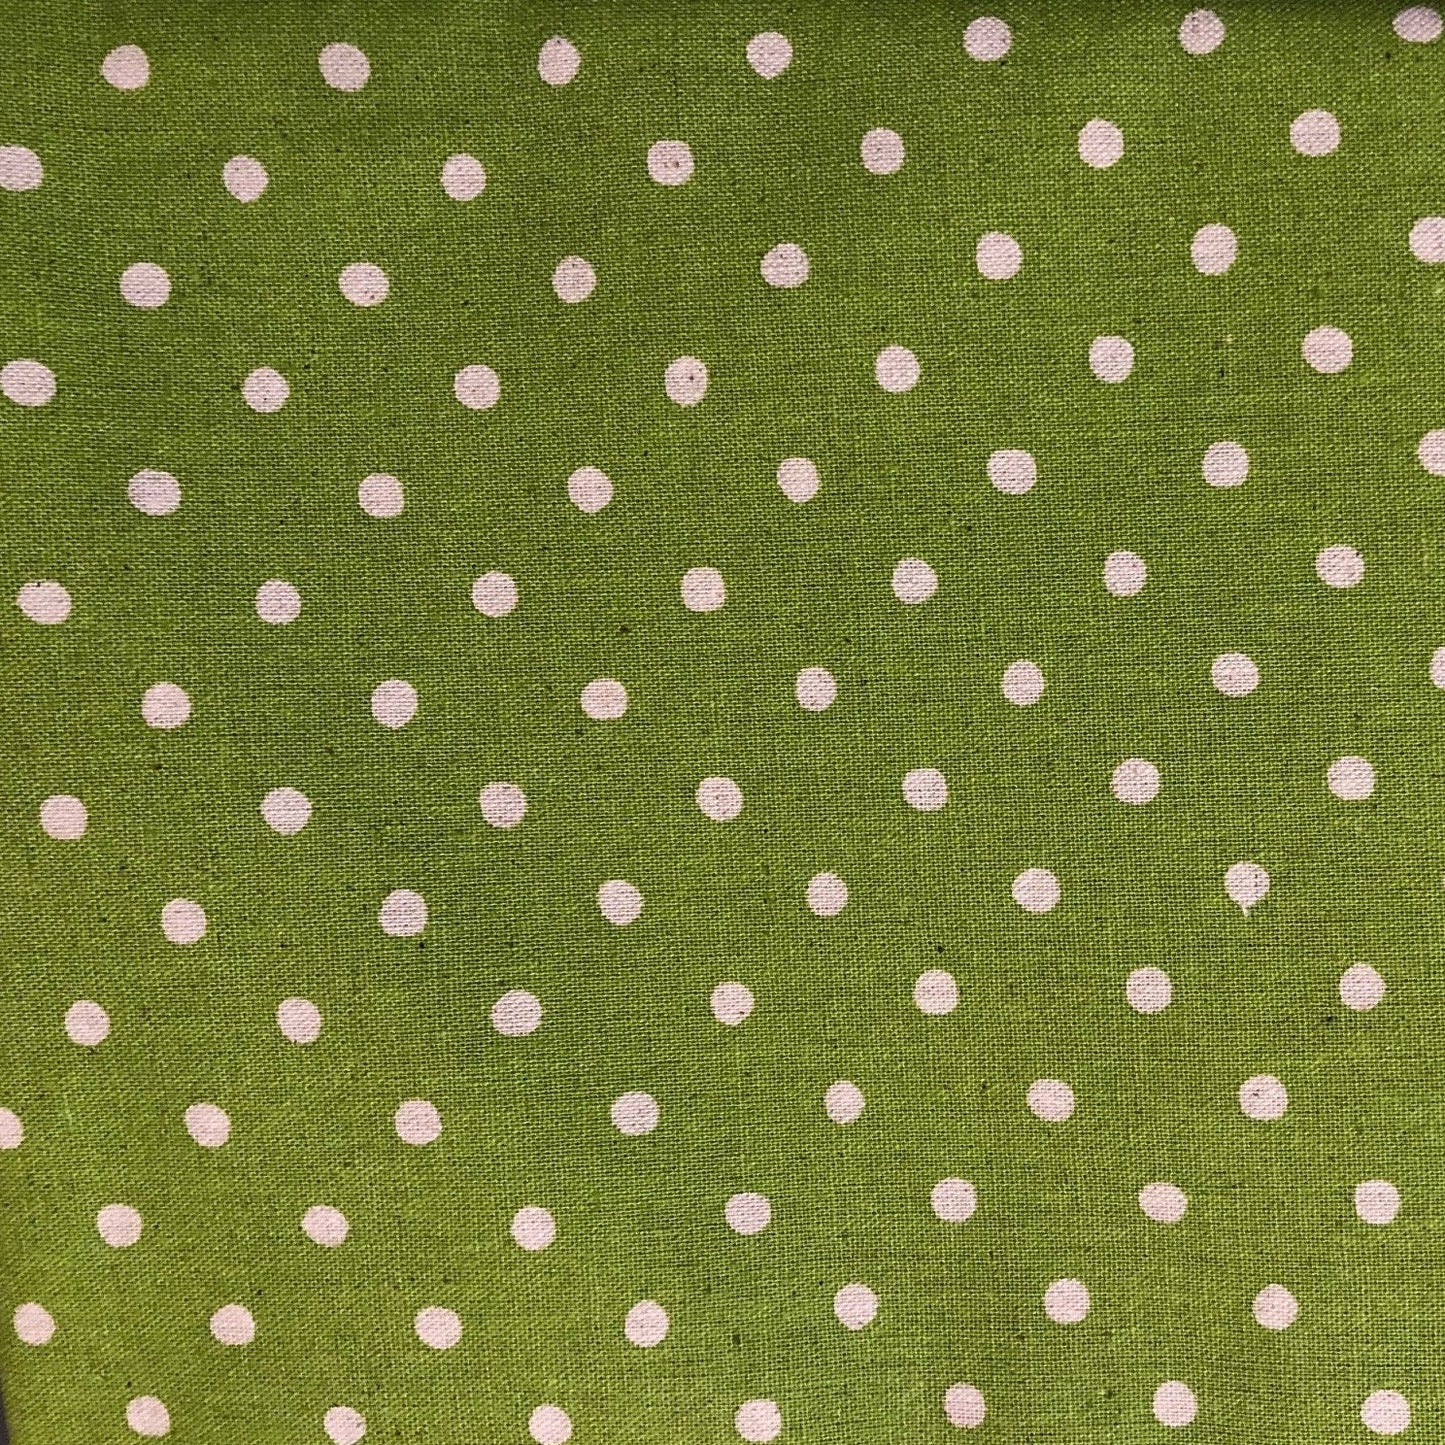 Chartreuse polka dot (Pretty Patches)